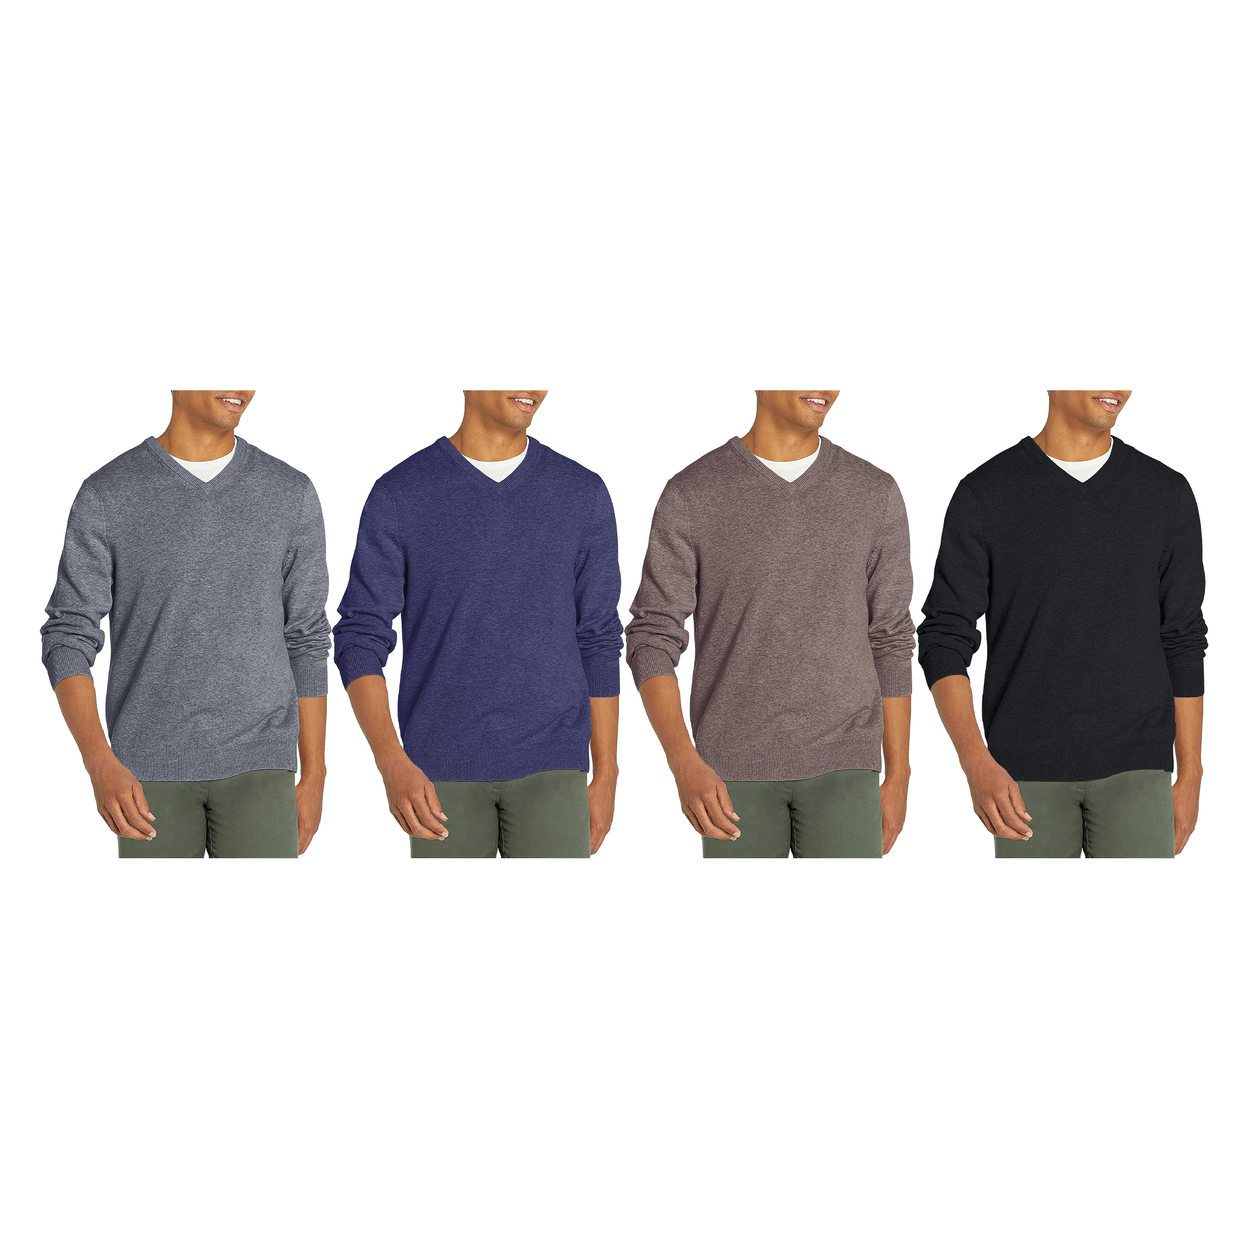 2-Pack: Men's Casual Ultra Soft Slim Fit Warm Knit V-Neck Sweater - Black & Blue, Small